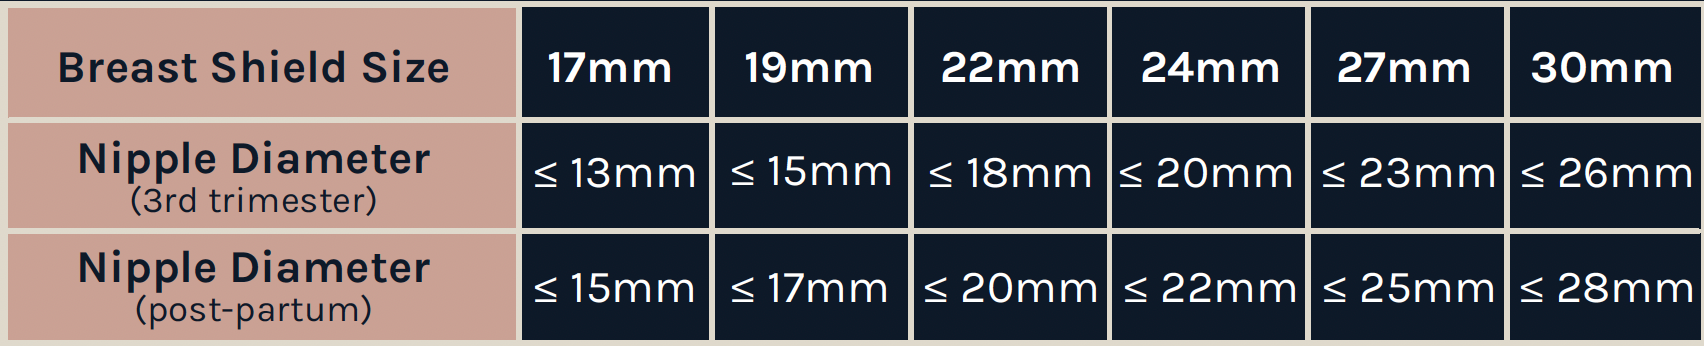 Lola&Lykke Guide to Breast Shield sizes